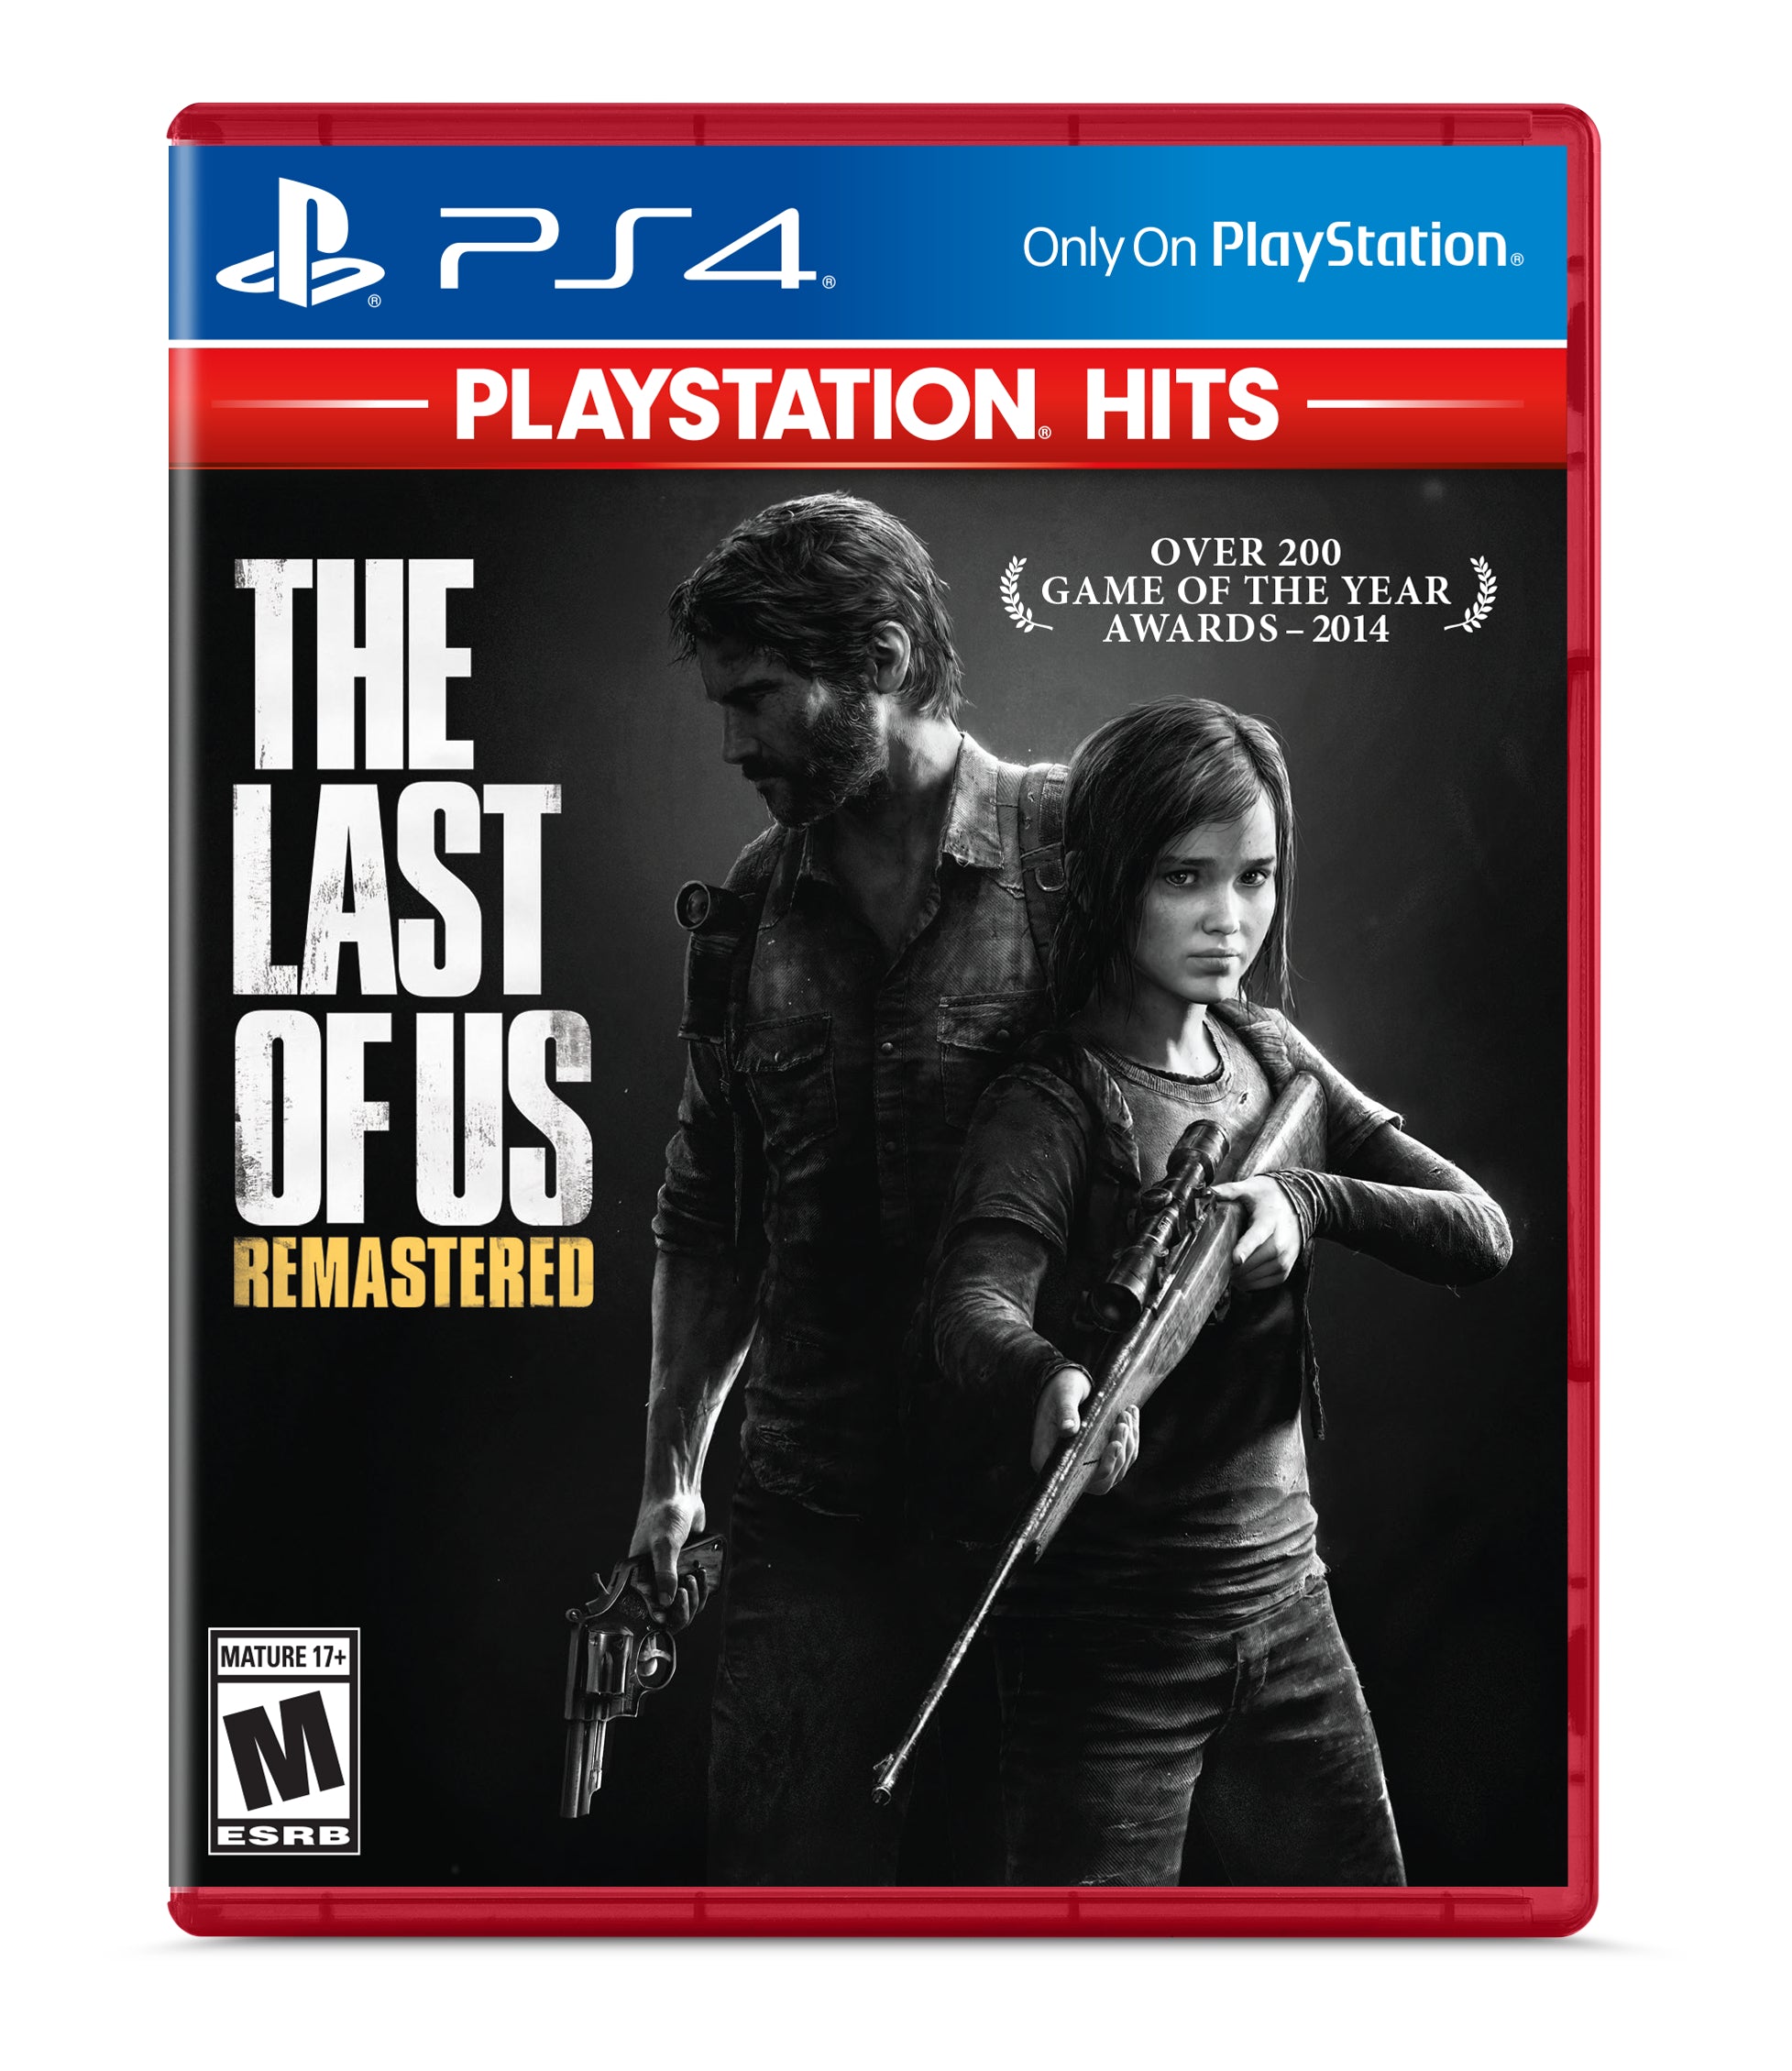 Sony PlayStation 4 Slim The Last of Us: Remastered Bundle 1TB PS4 Gaming Console, Jet Black, with Mytrix High Speed HDMI